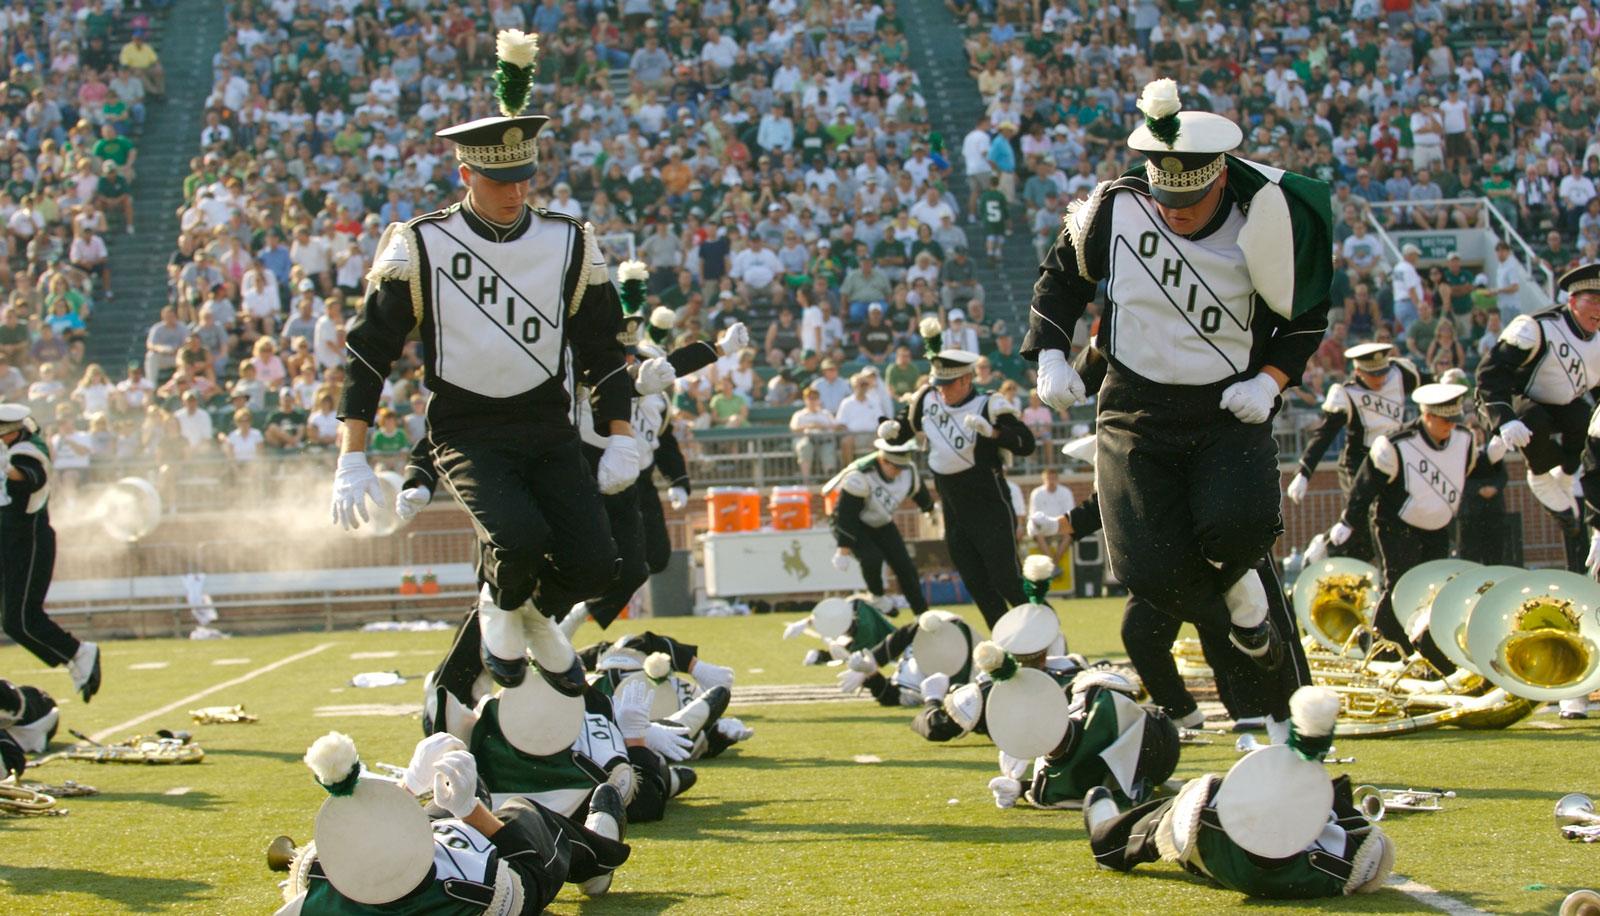 The Marching 110 perform their halftime routine at a football game